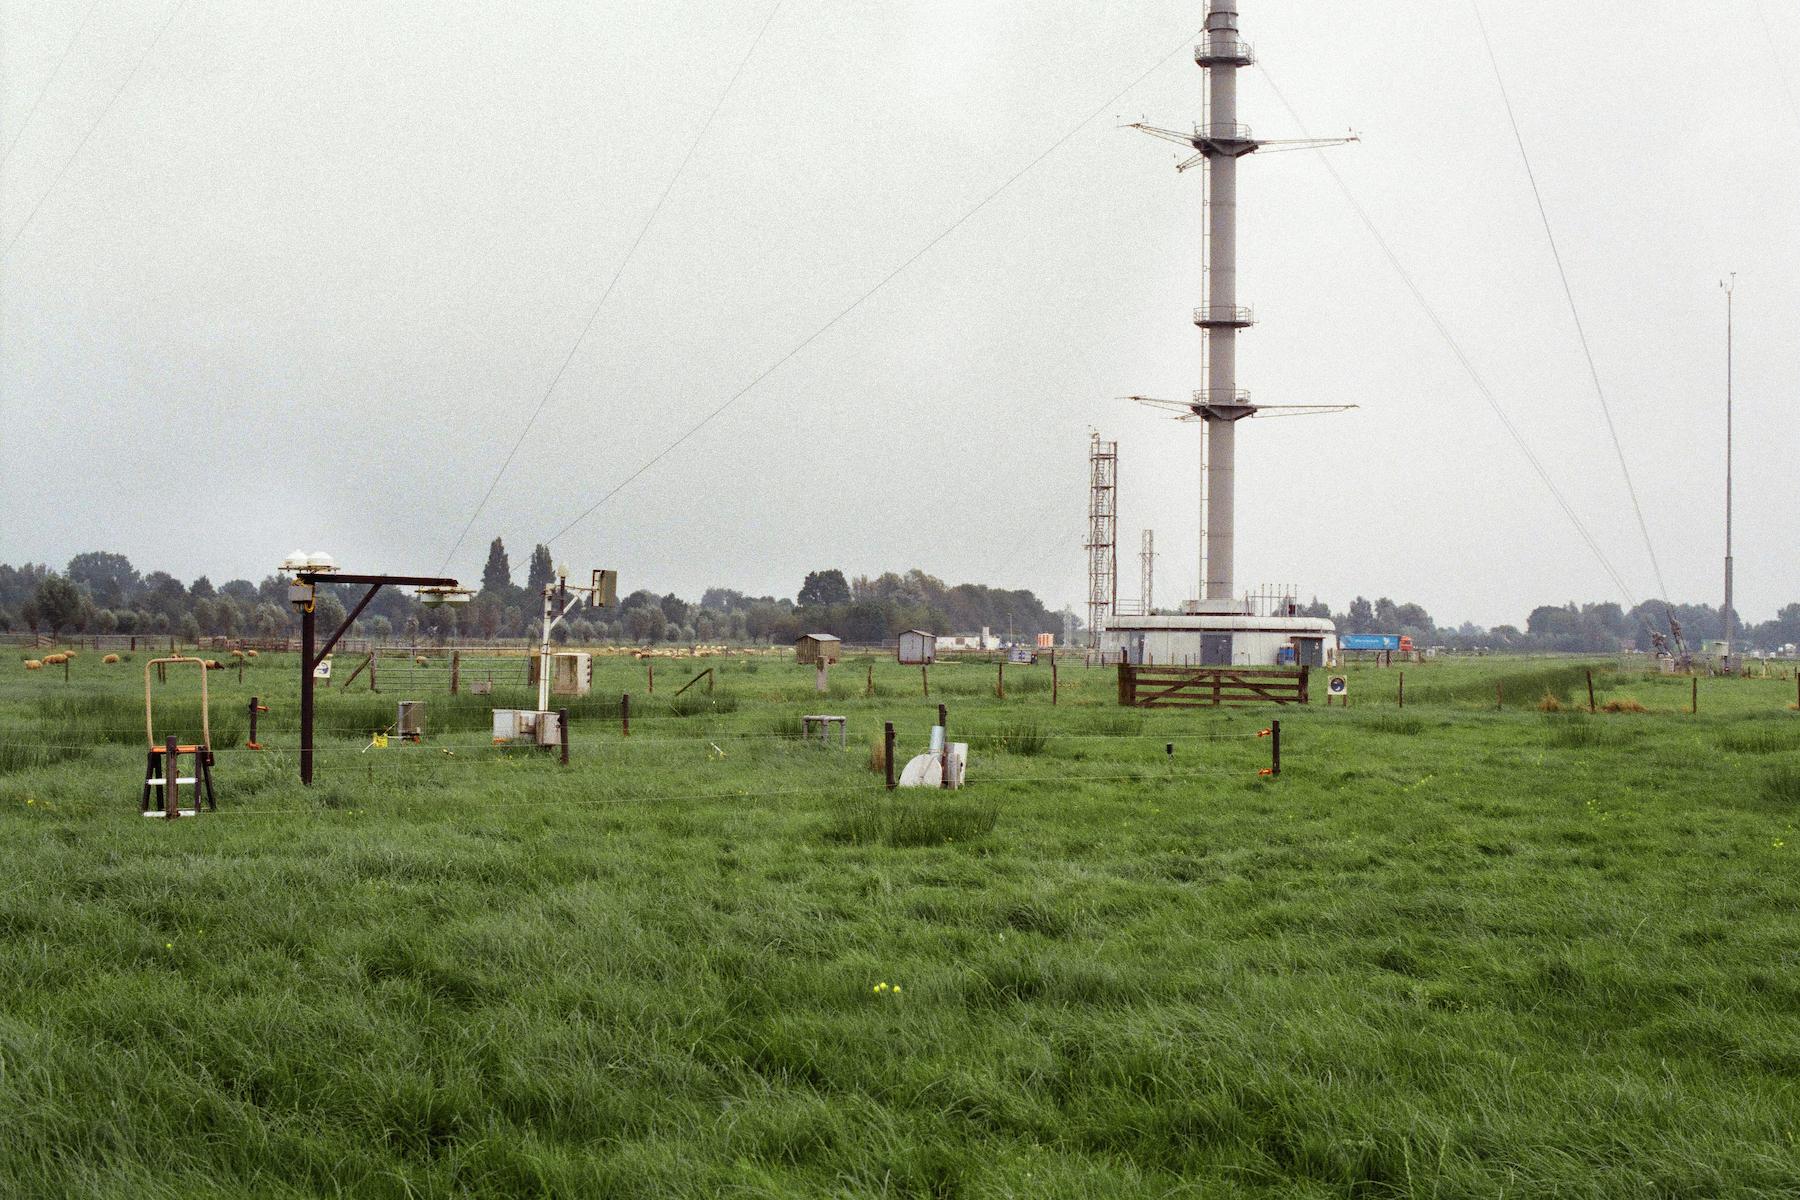 Ground-based sensors at the KNMI Cabauw atmospheric research facility. Photo: Matthew Harvey.